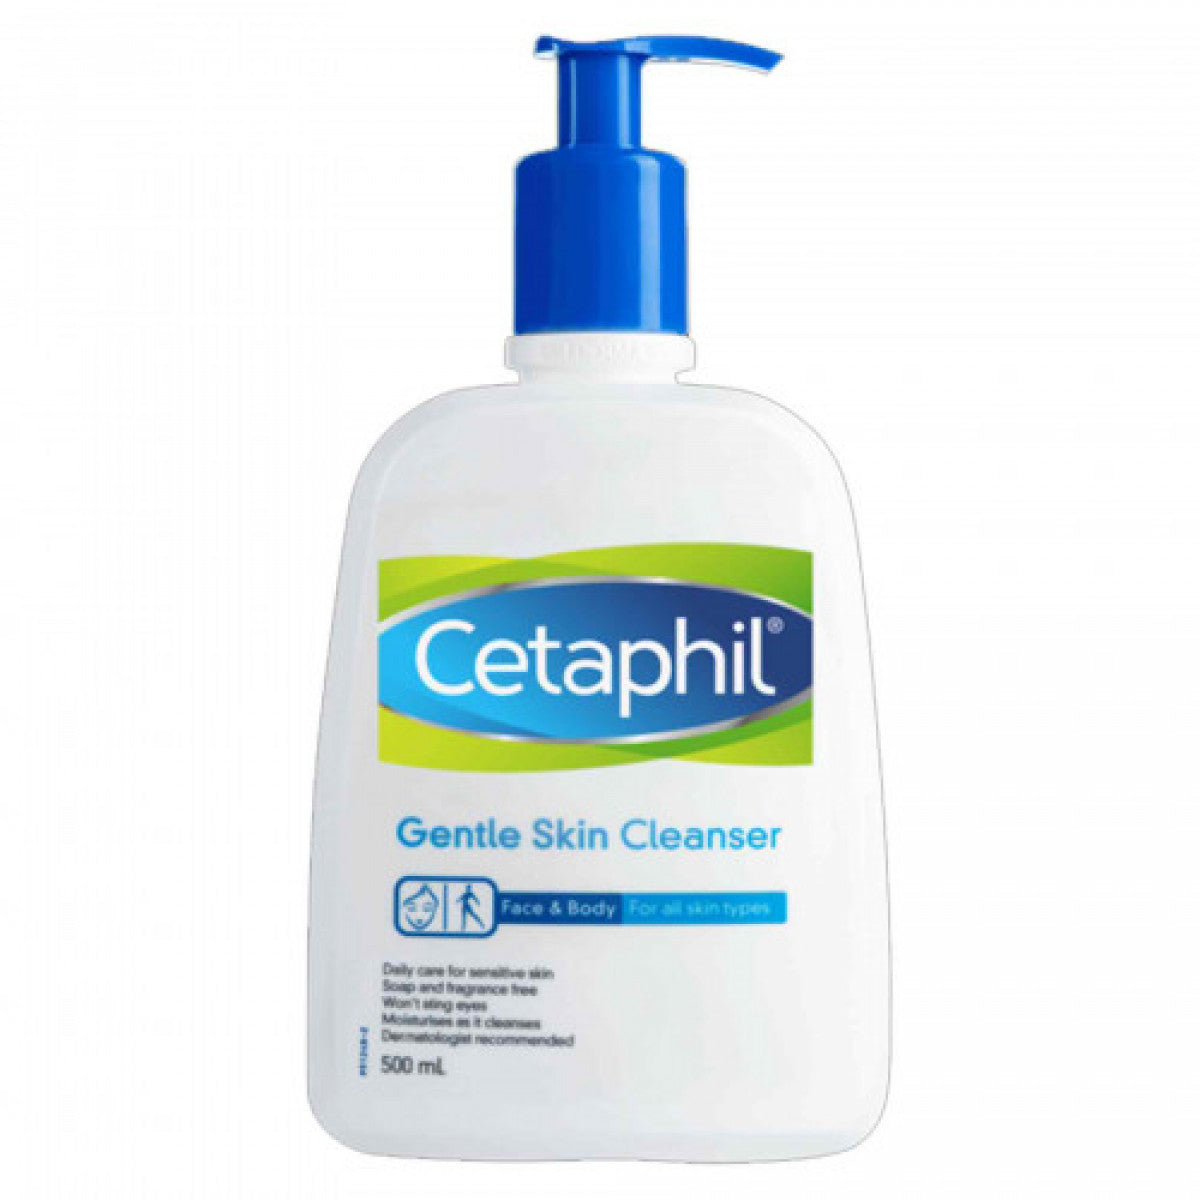 Cetaphil Gentle Skin Cleanser (Face & Body) (For All Skin Types) 500mL